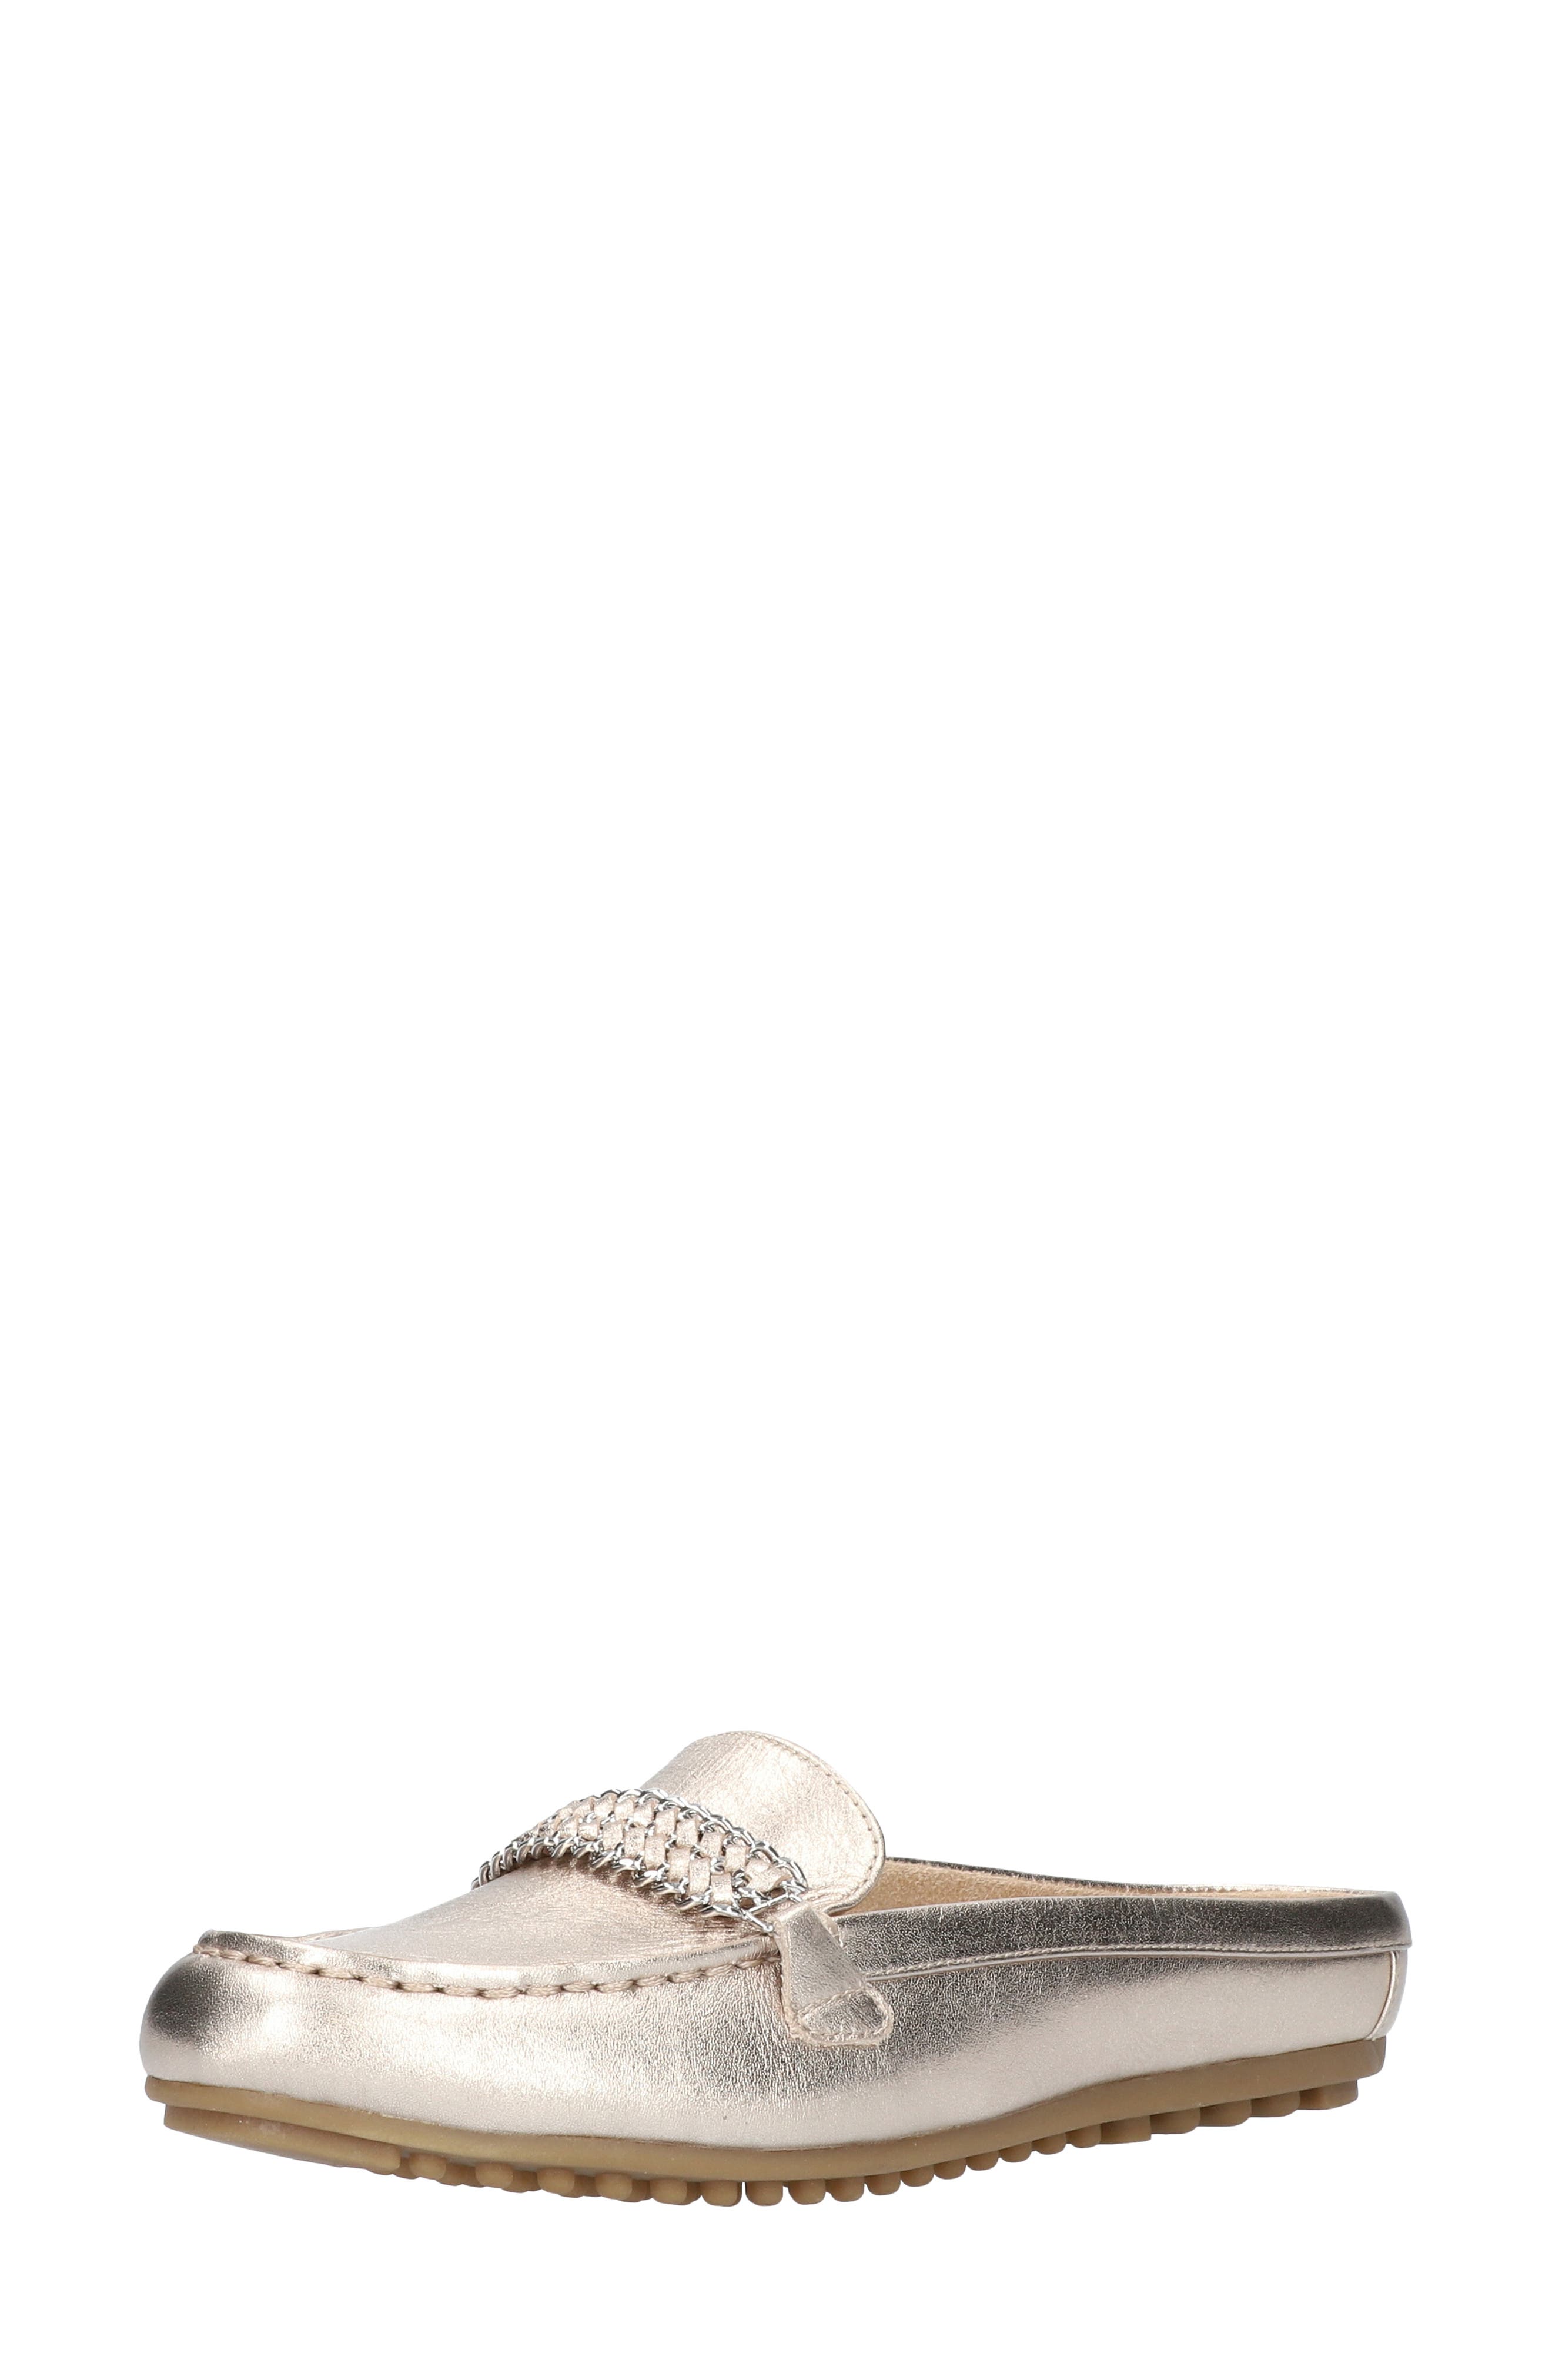 nordstrom wide shoes womens